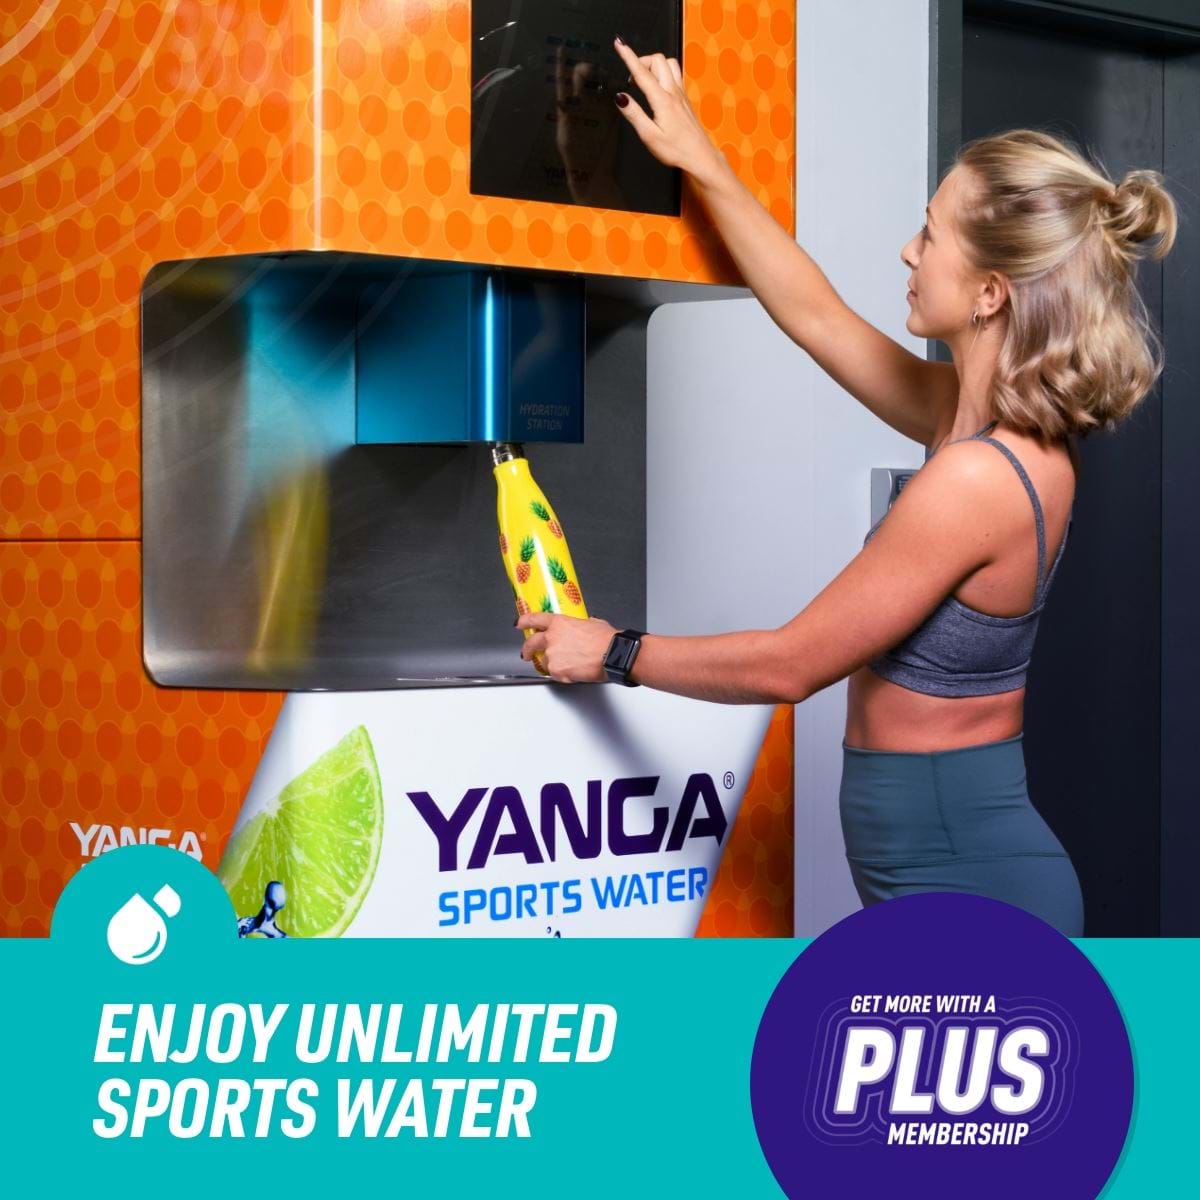 Unlimited sports water